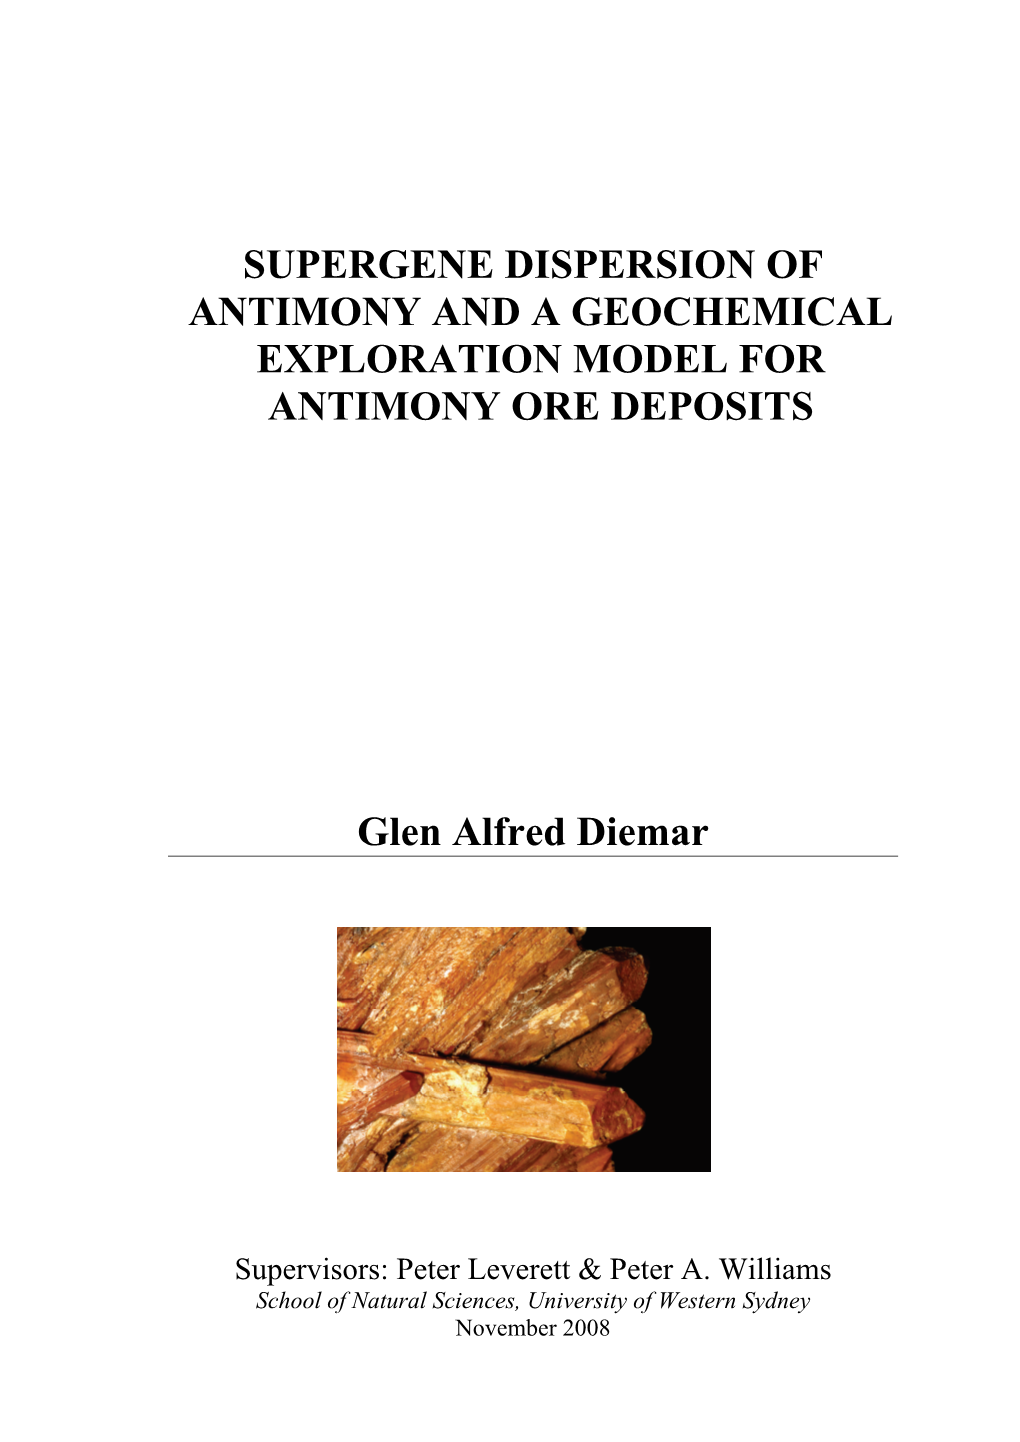 Supergene Dispersion of Antimony and a Geochemical Exploration Model for Antimony Ore Deposits